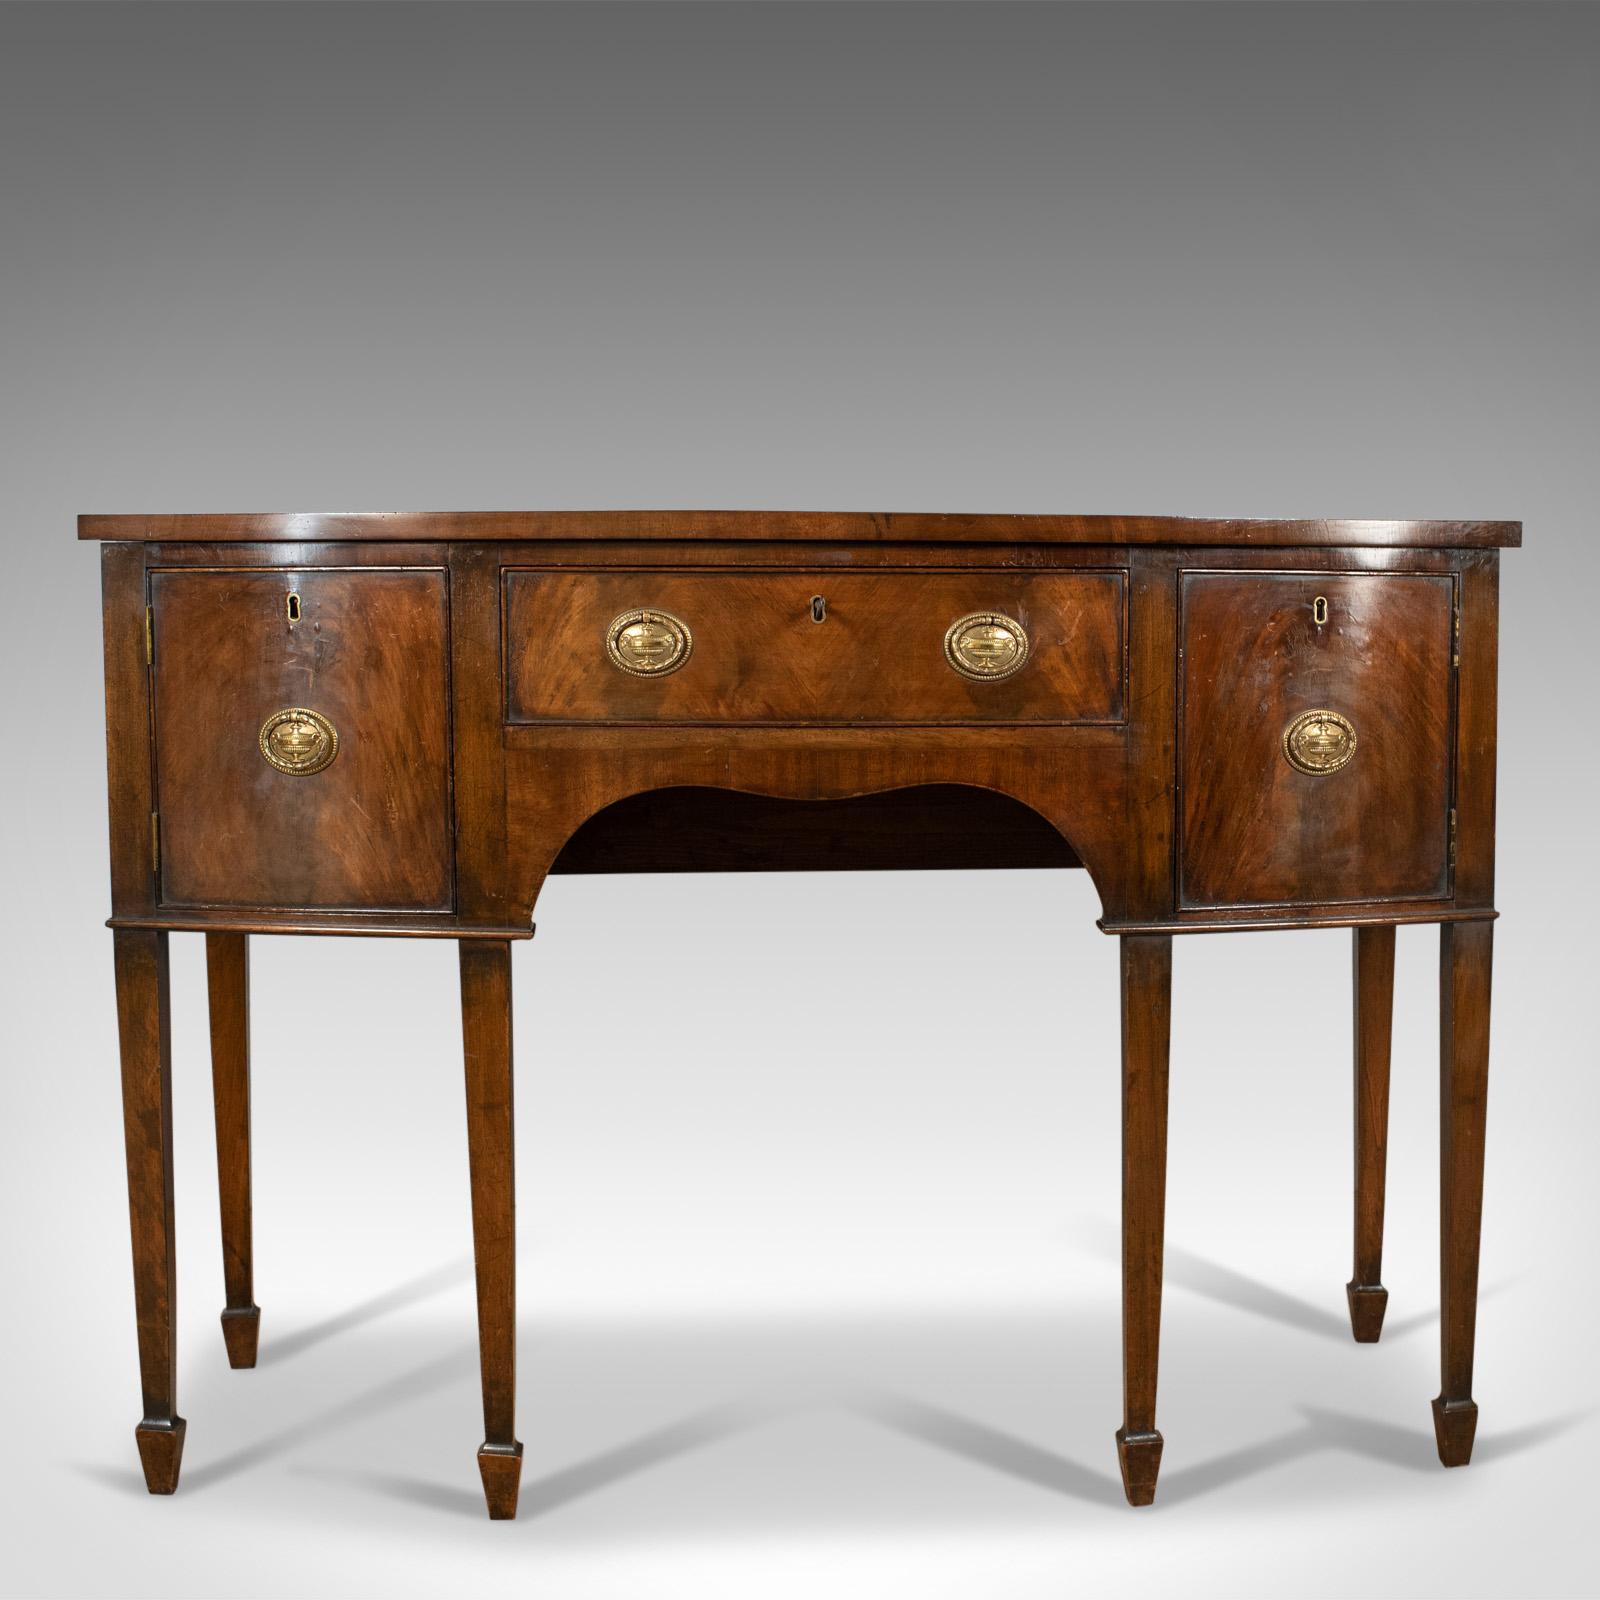 This is an antique sideboard, an English Regency revival server in mahogany dating to the late 19th century, circa 1890.

Select mahogany with grain interest throughout
Desirable aged patina in the lustrous, wax polished finish
Displaying